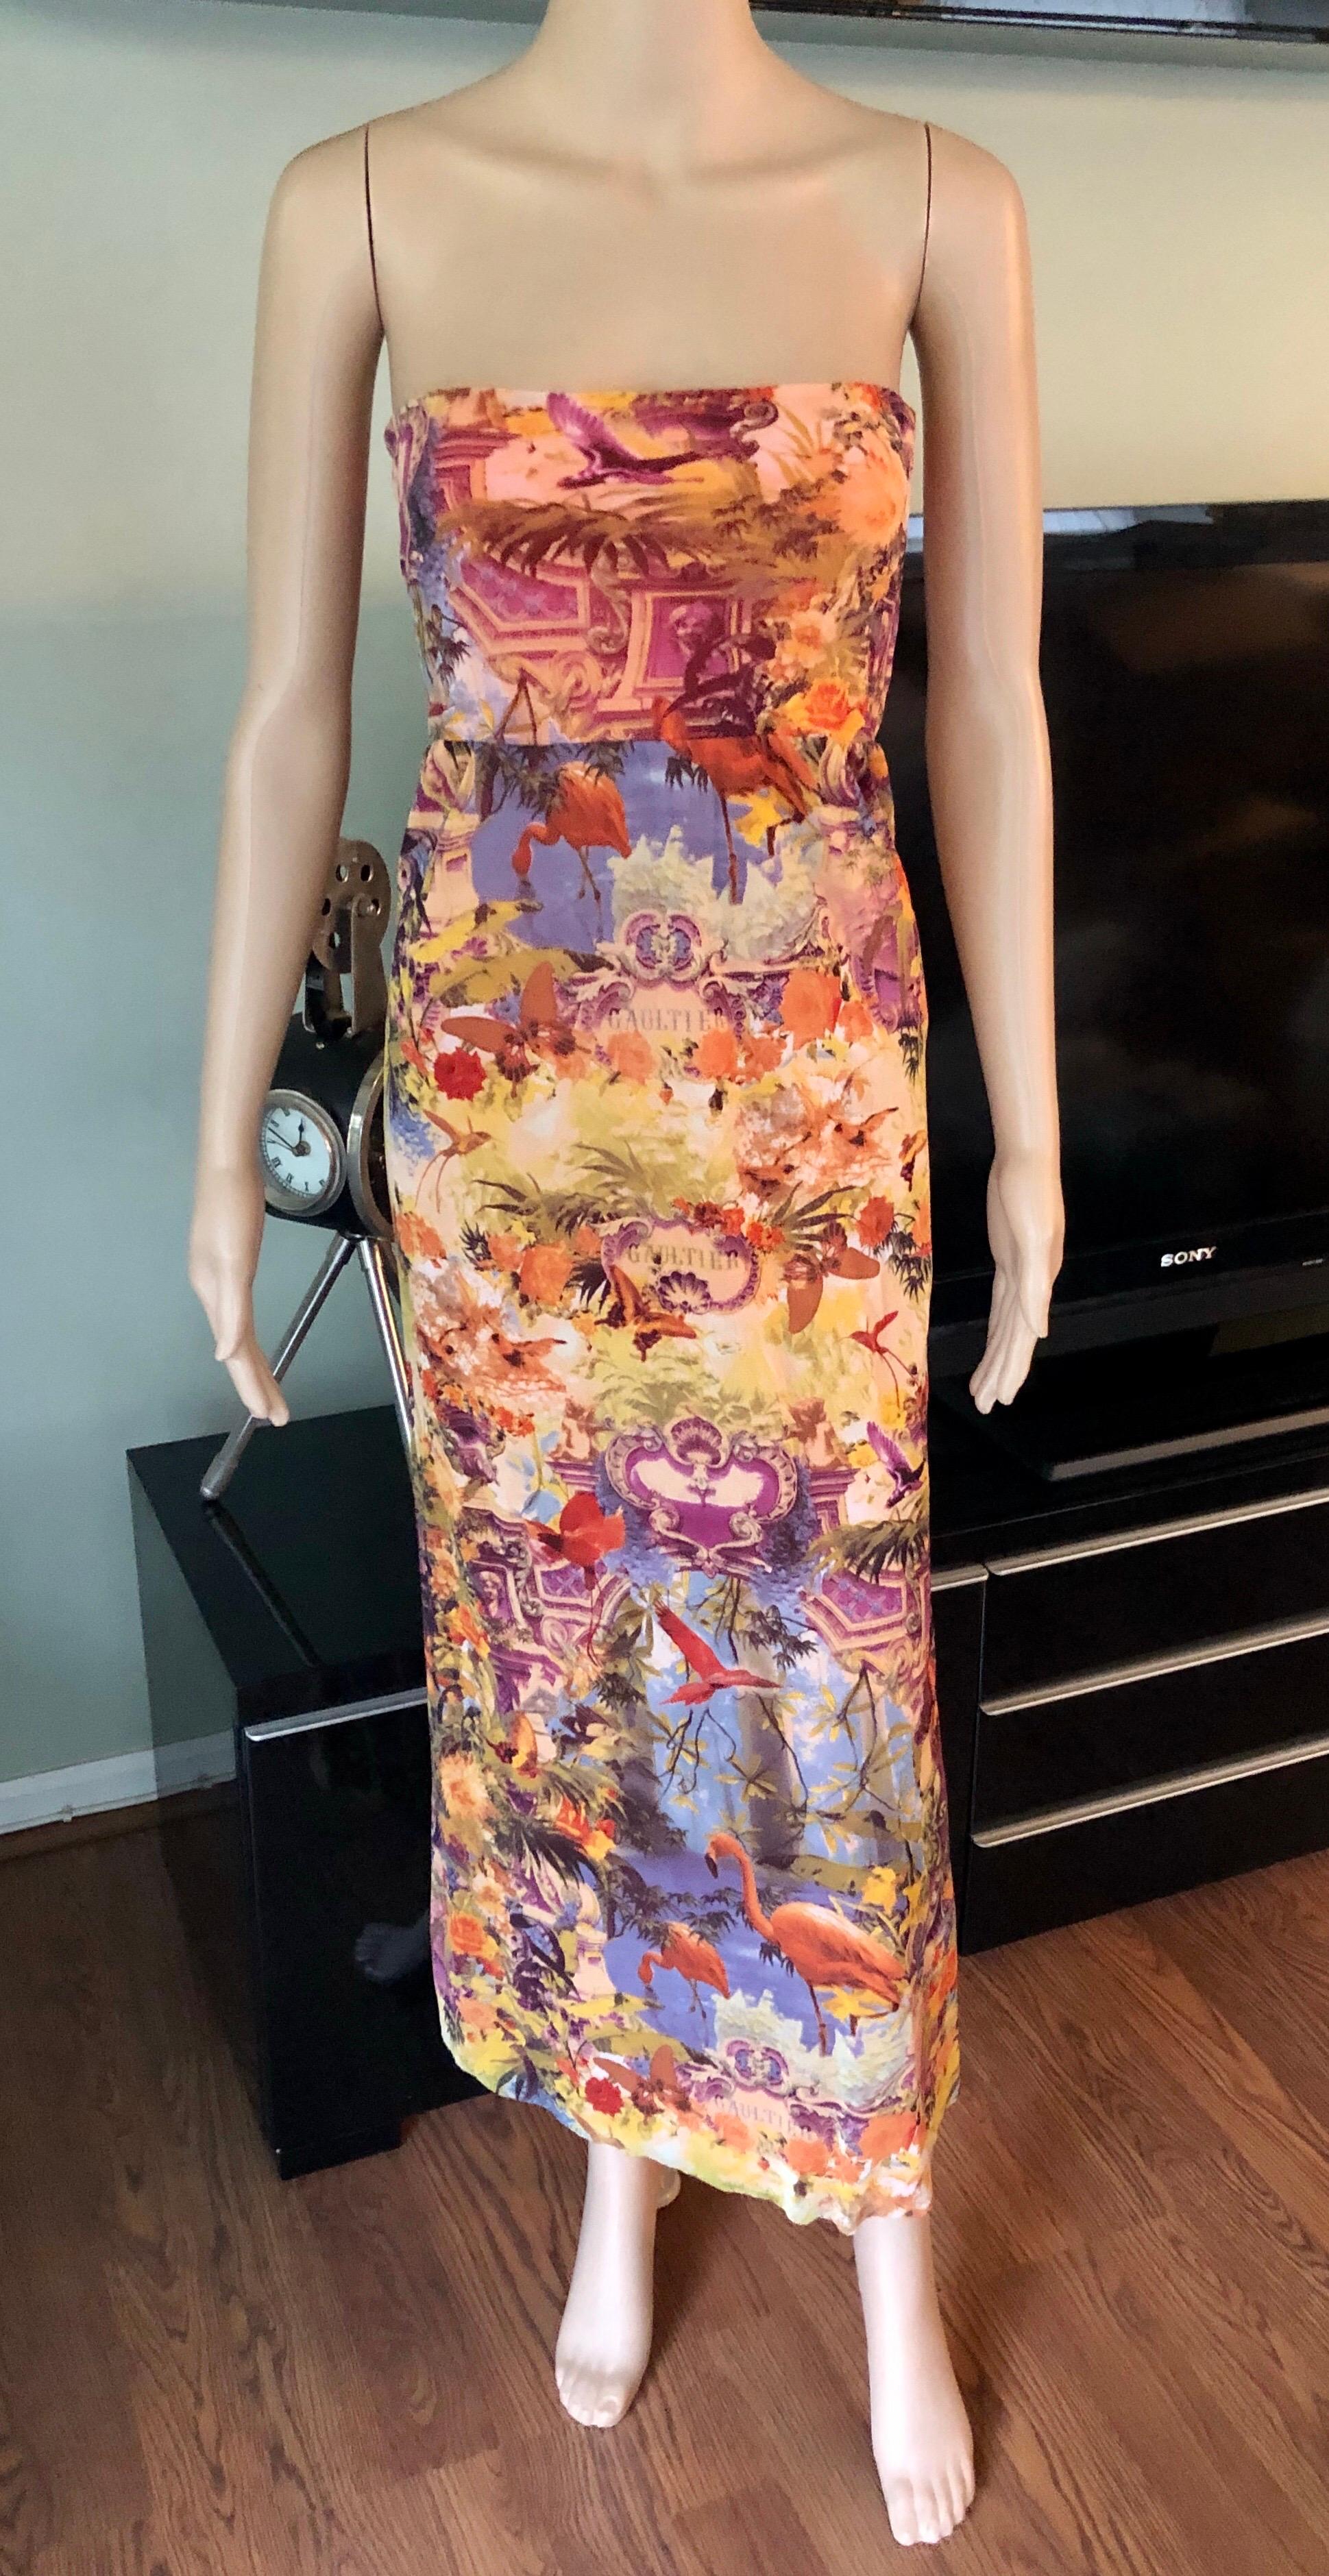 Jean Paul Gaultier Soleil Tropical Flamingo Print Logo Semi-Sheer Mesh Maxi Skirt Dress

Please note this piece is very versatile and it could be worn as a strapless dress or a maxi skirt as shown in last two photos.